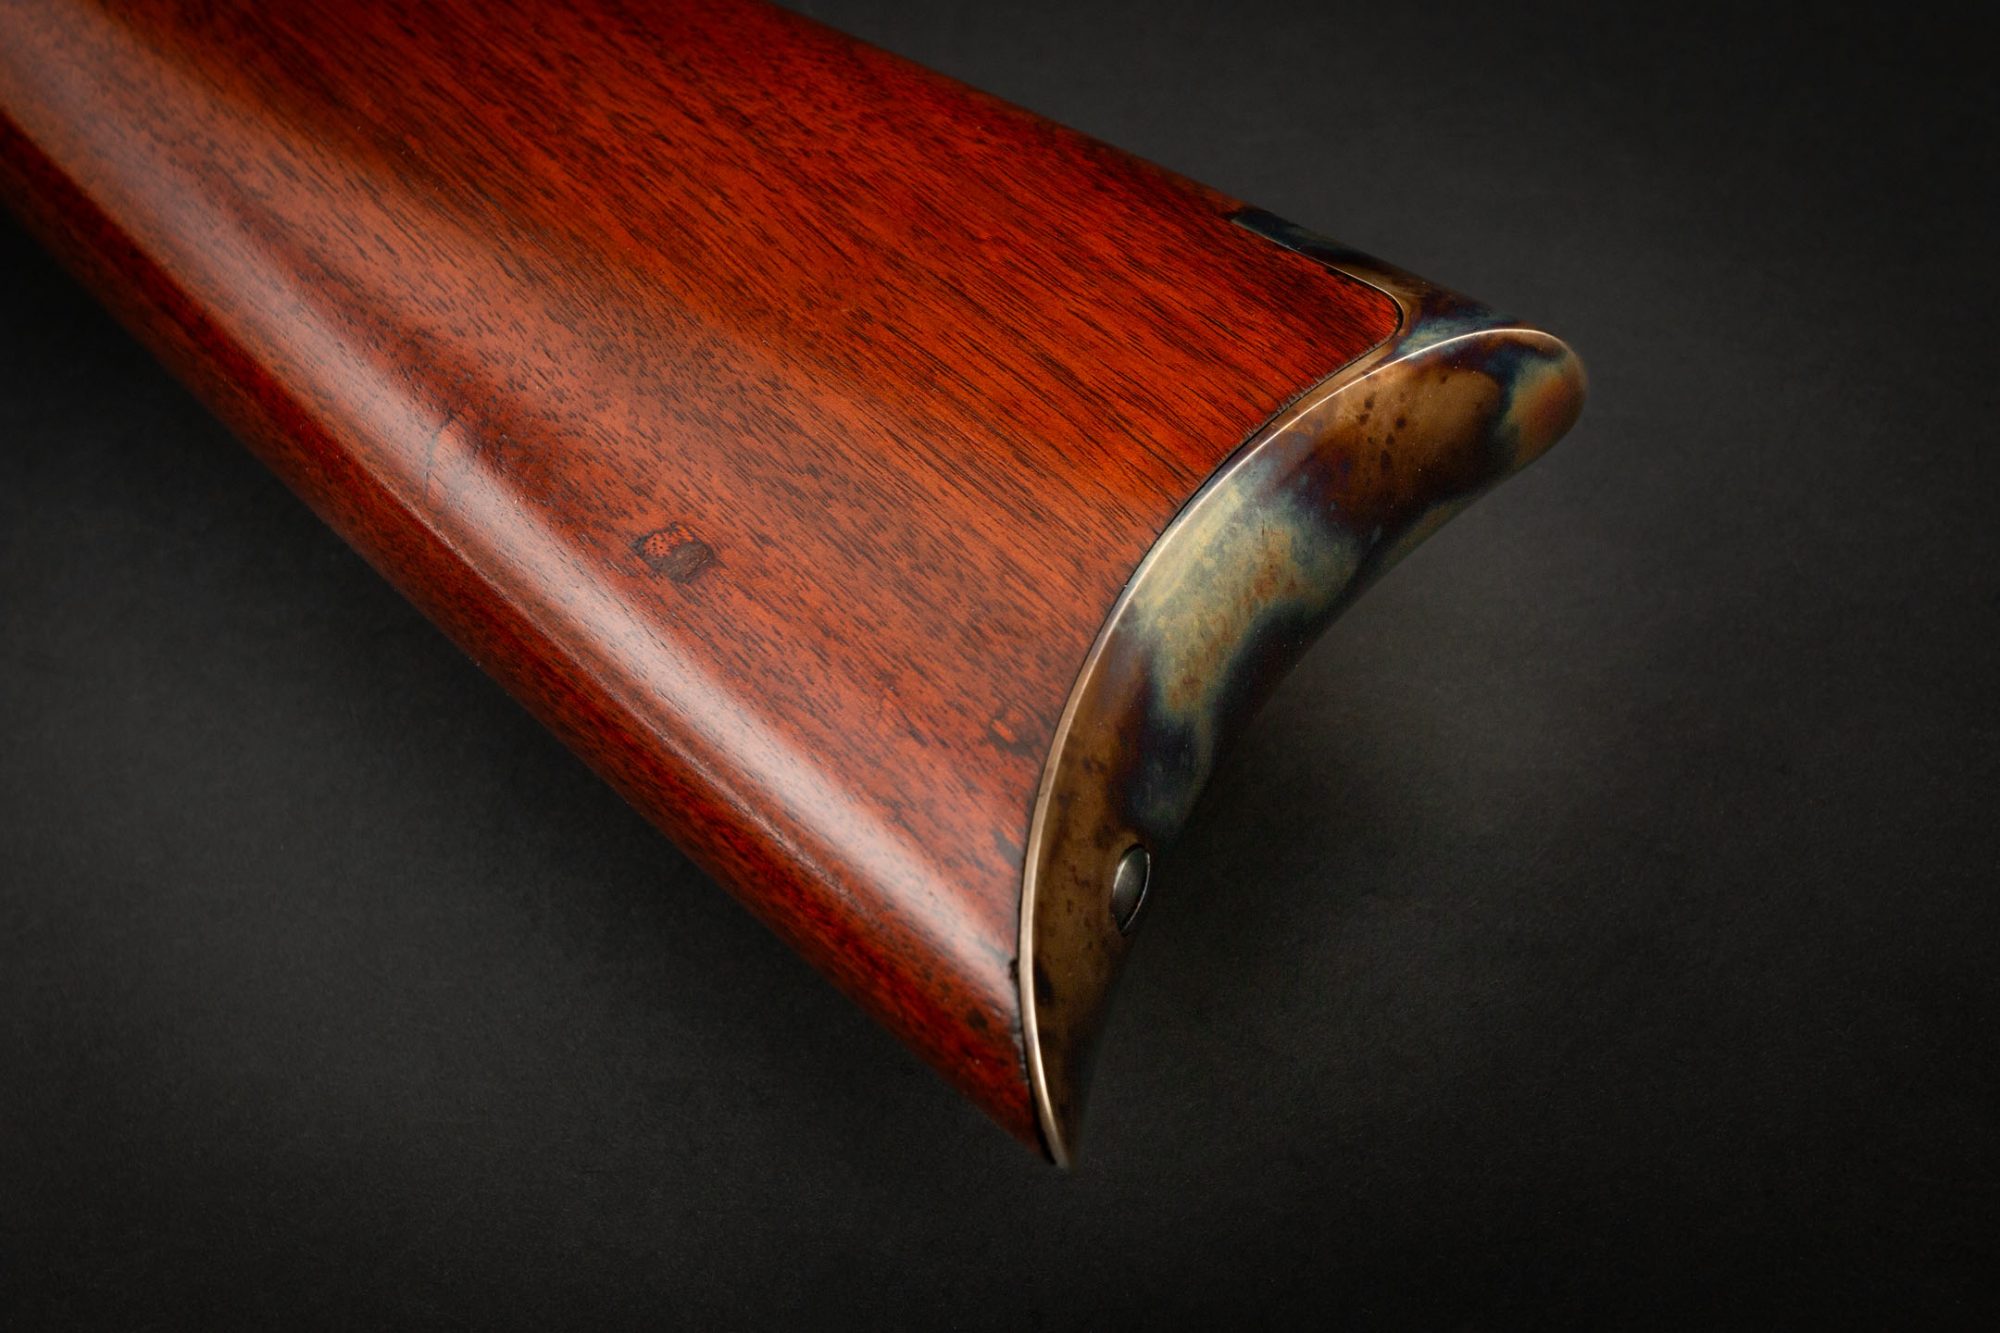 Winchester Model 1886 in .45-70 Win from 1896, restored in 2016 by Turnbull Restoration Co. of Bloomfield, NY